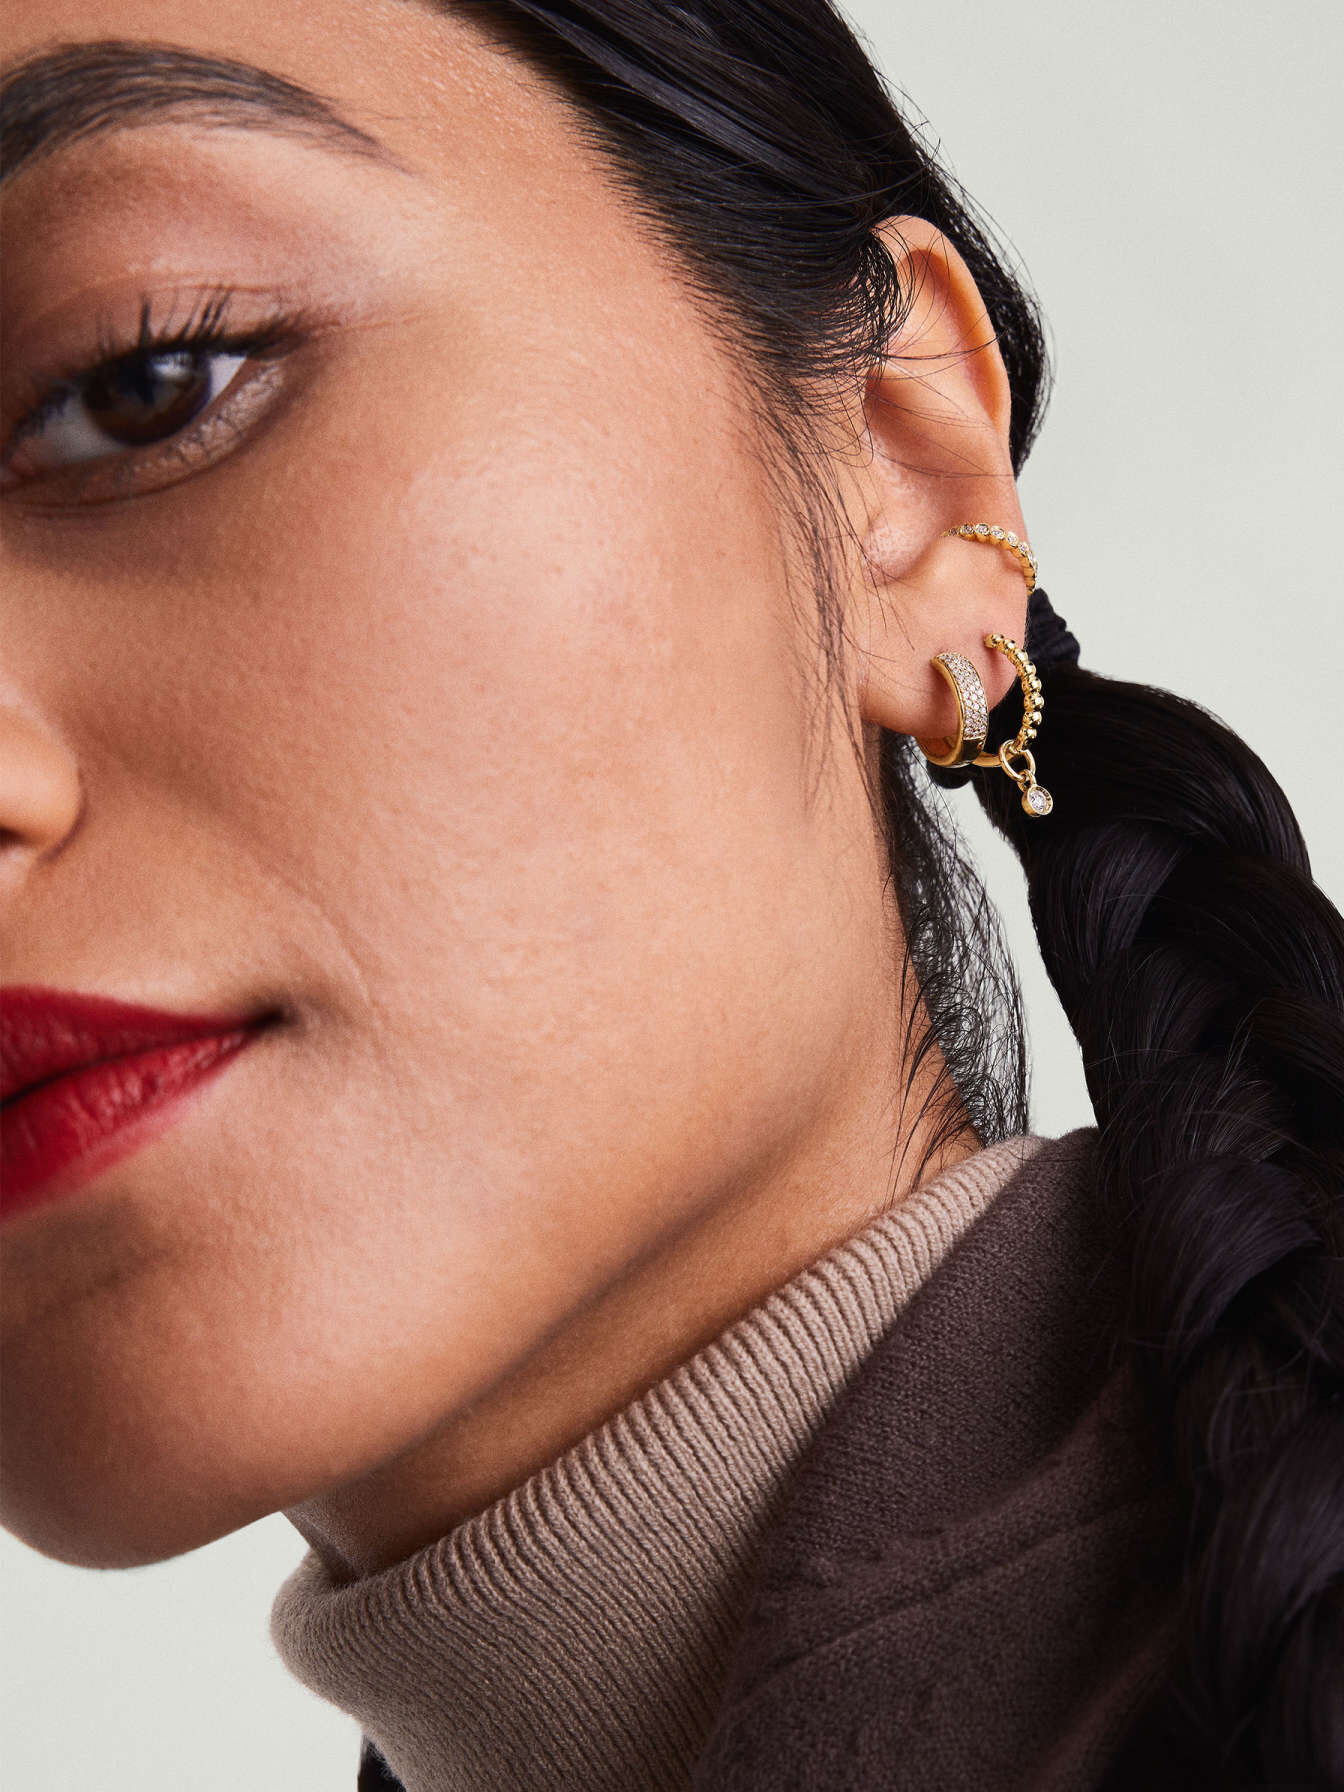 A studio shot of a model wearing 3 Mejuri small good hoop earrings with diamond accents on one ear.